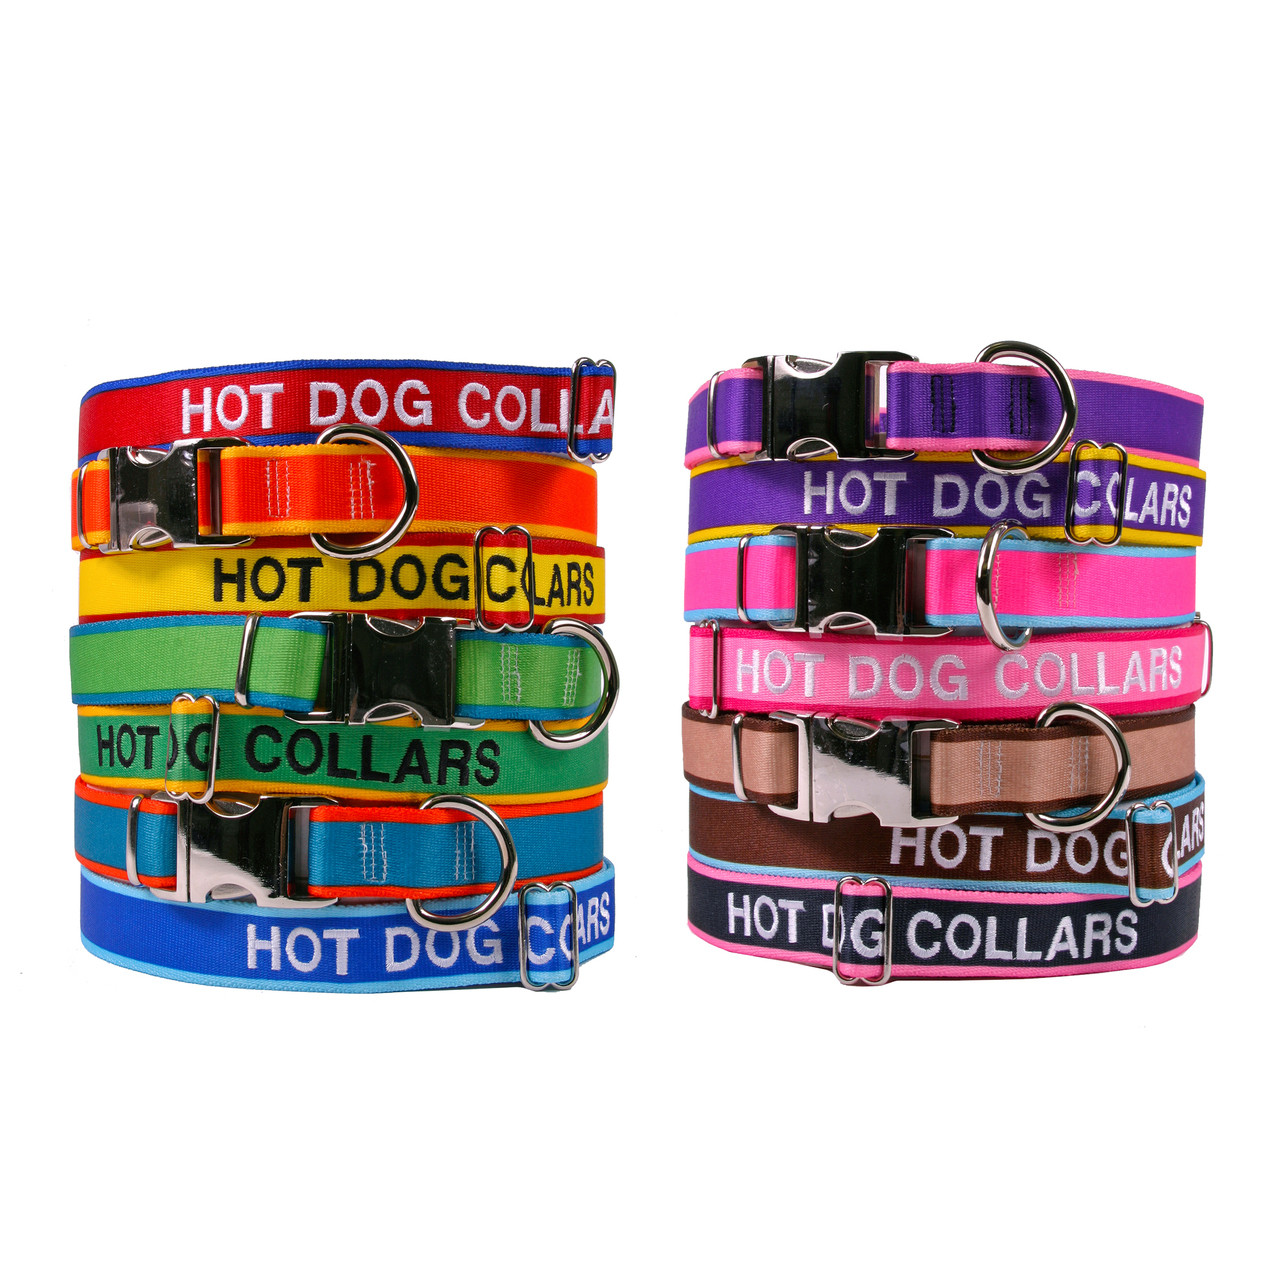 Premium, personalised pet collars, leads and harnesses.